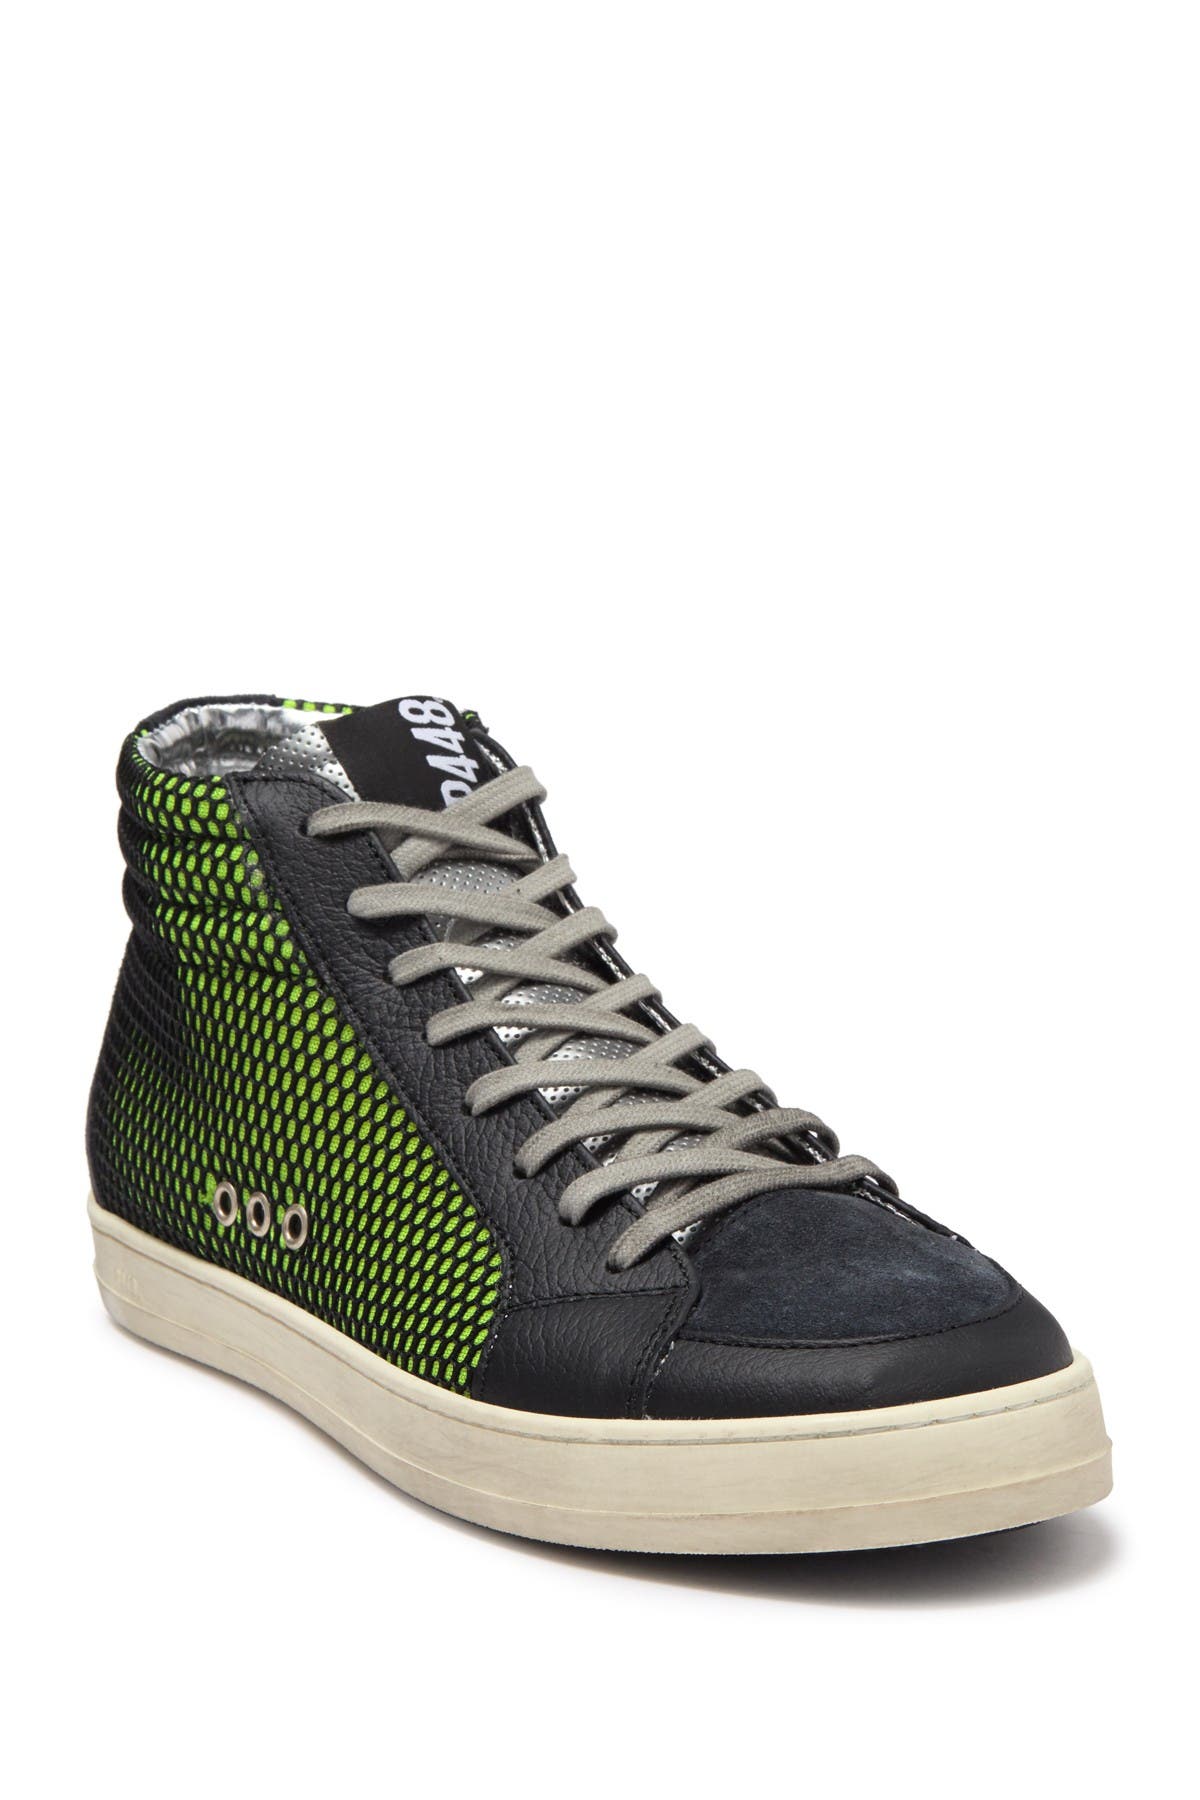 P448 | Skate Ribbed Mid Lace-Up Sneaker 